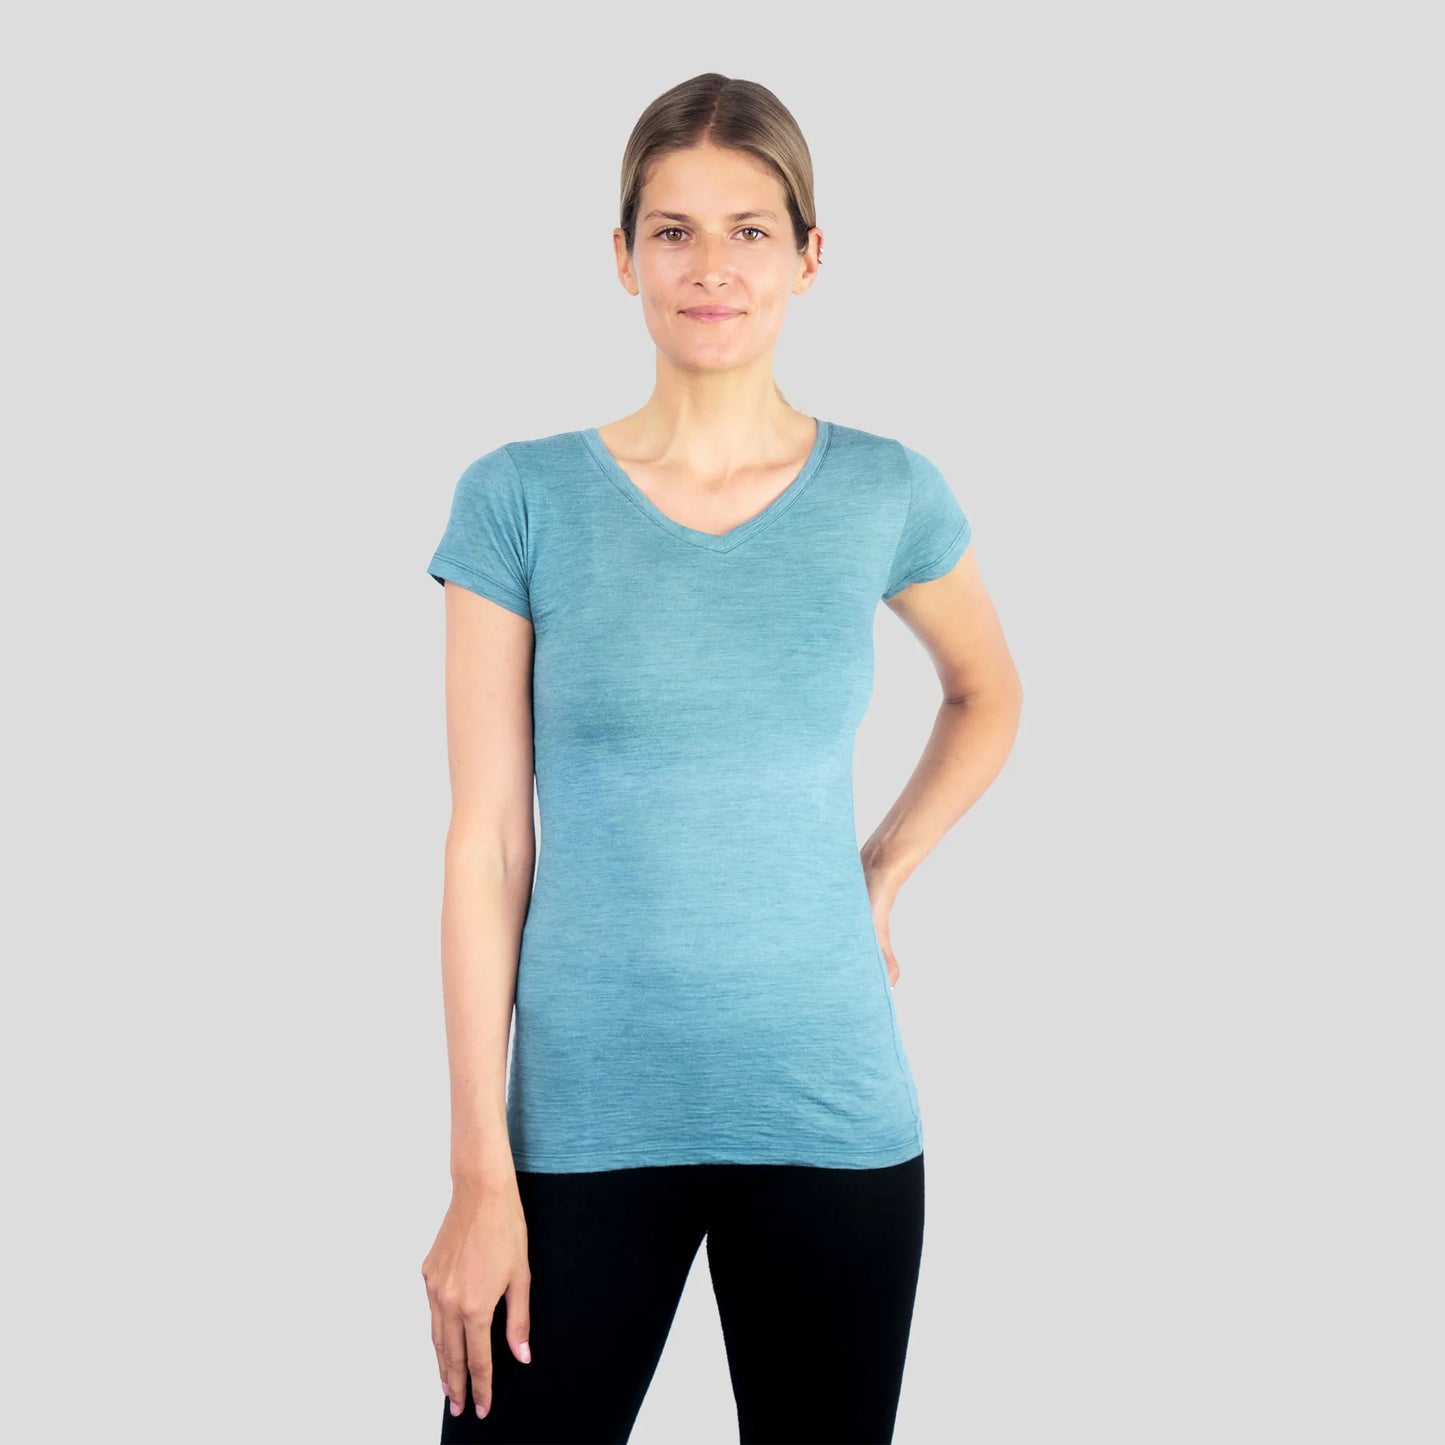 women ecological alpaca wool v neck shirt ultralight color natural turquoise